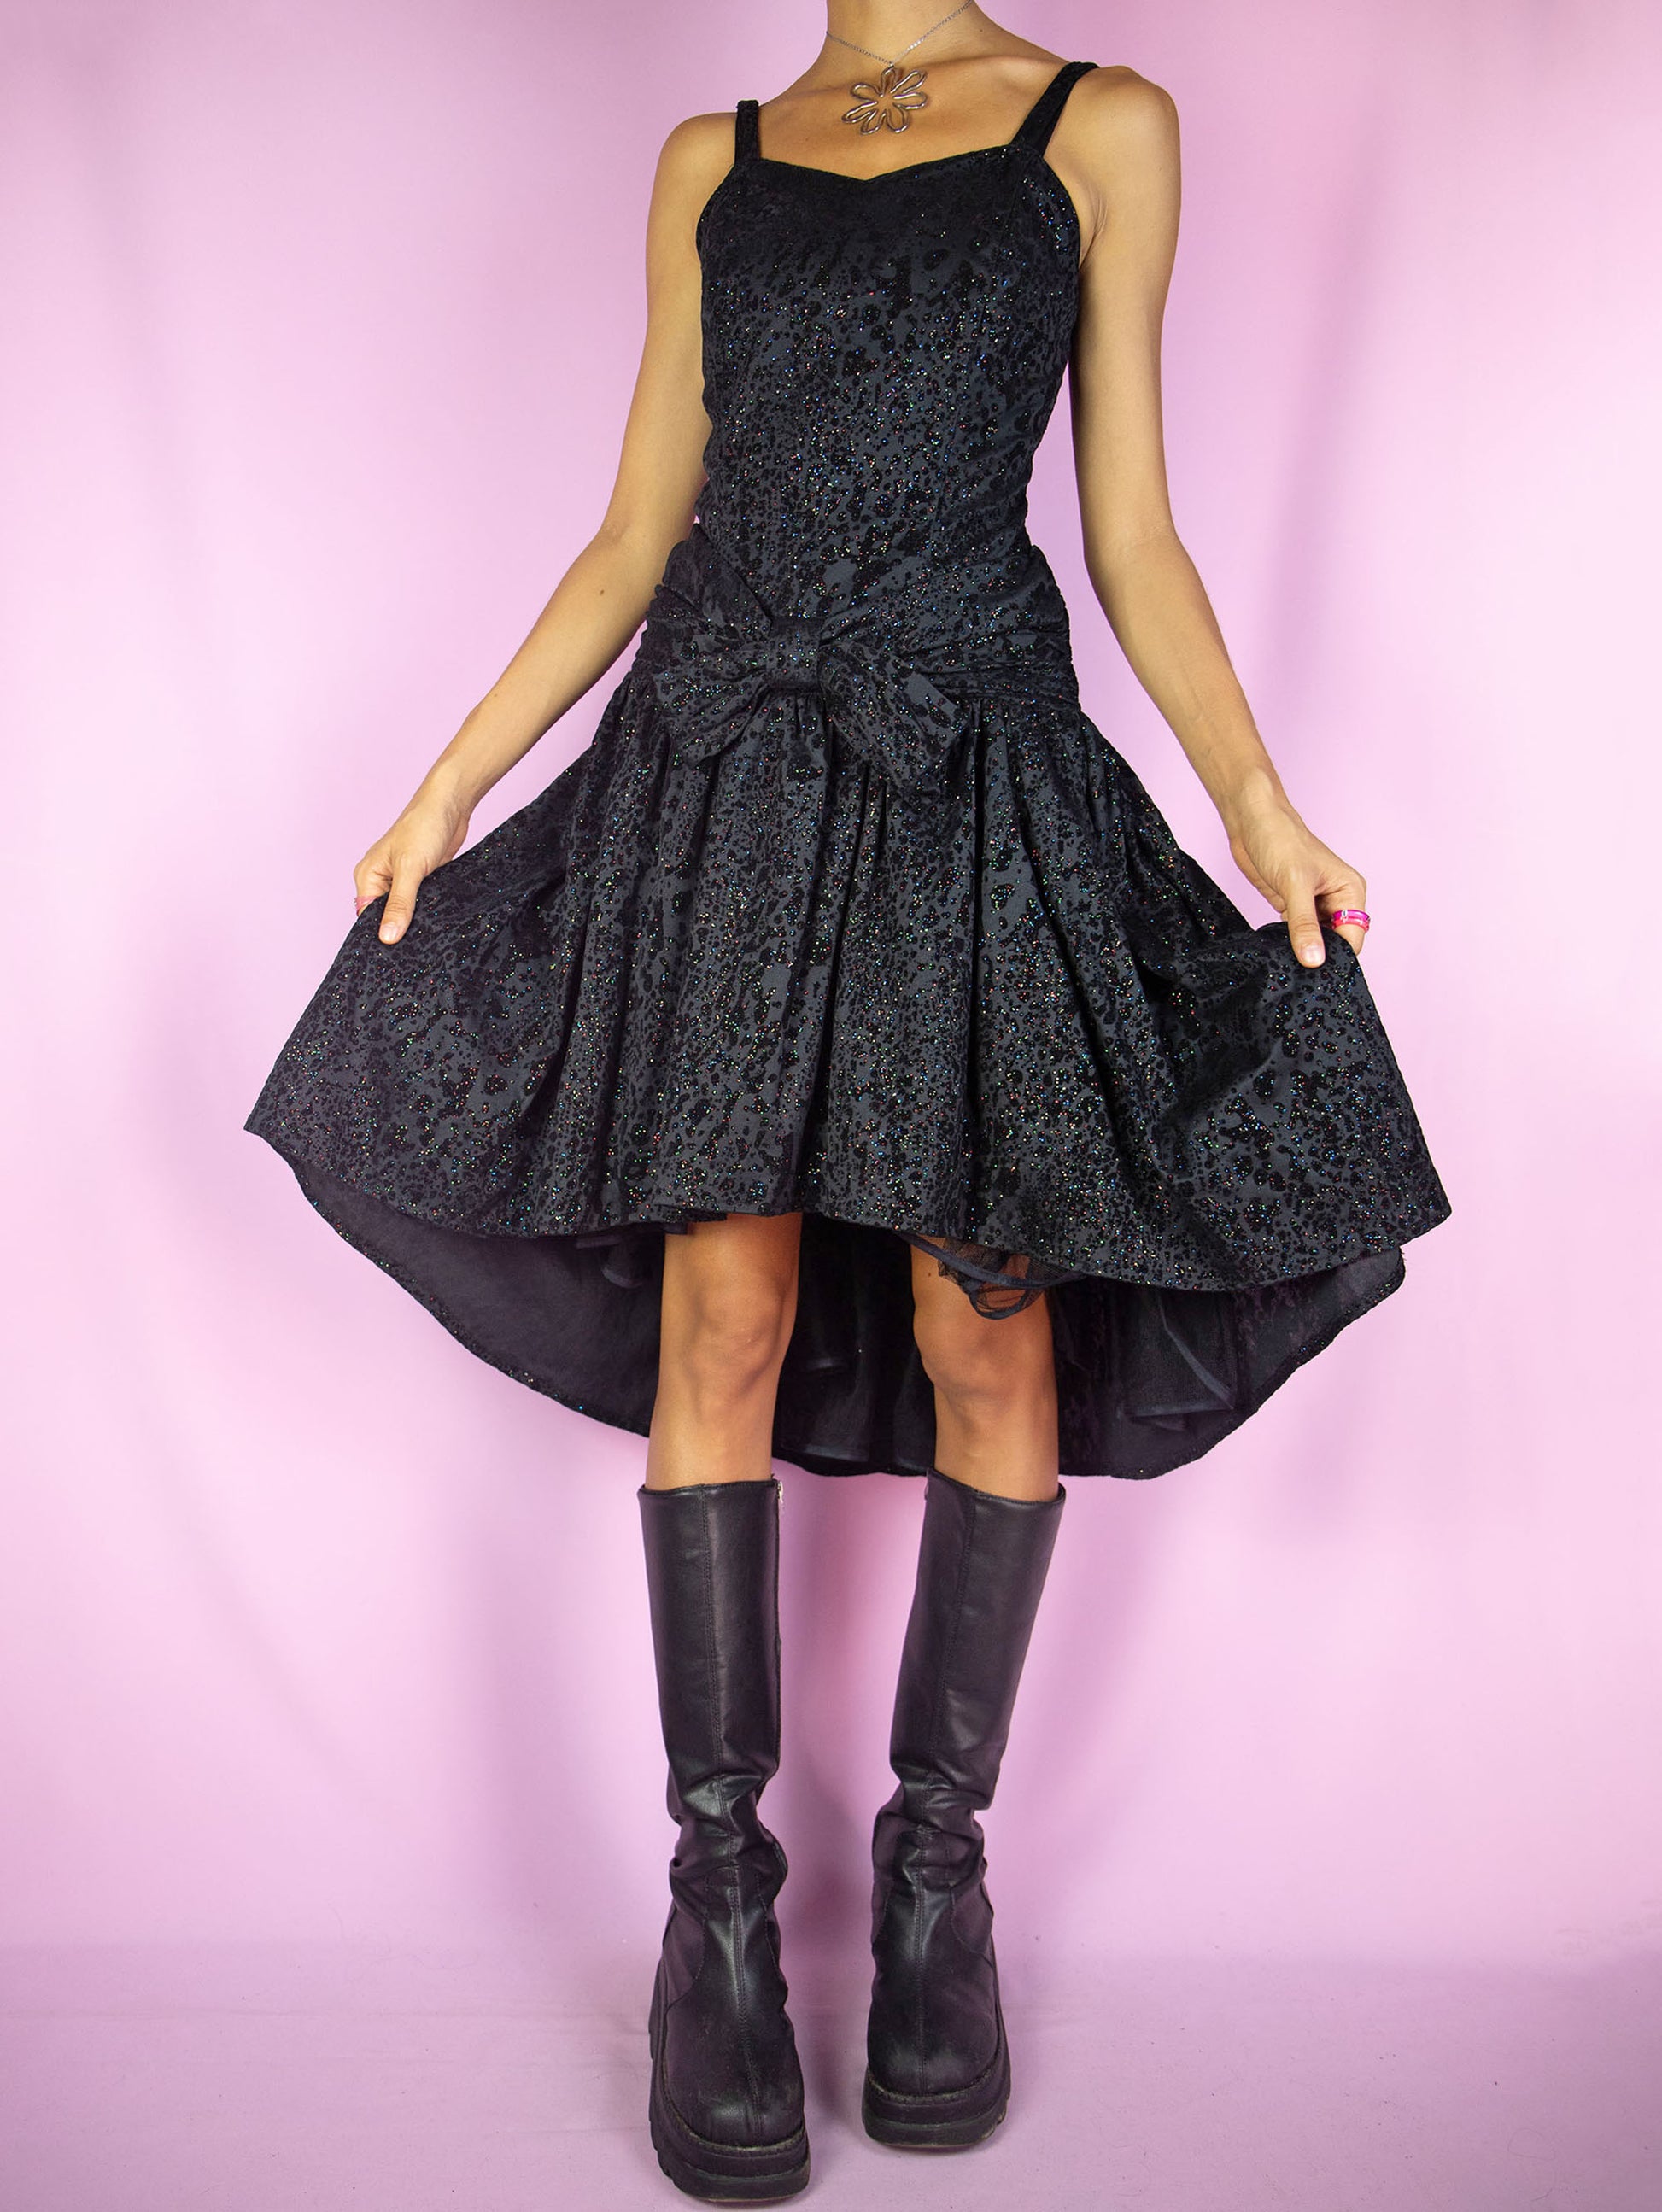 The Vintage 90s Party Black Mini Dress is an asymmetrical black dress with a shirred back, bow on the front, tulle hem and velvet and multicolored shiny glitter details. Whimsygoth 1990s midi dress.